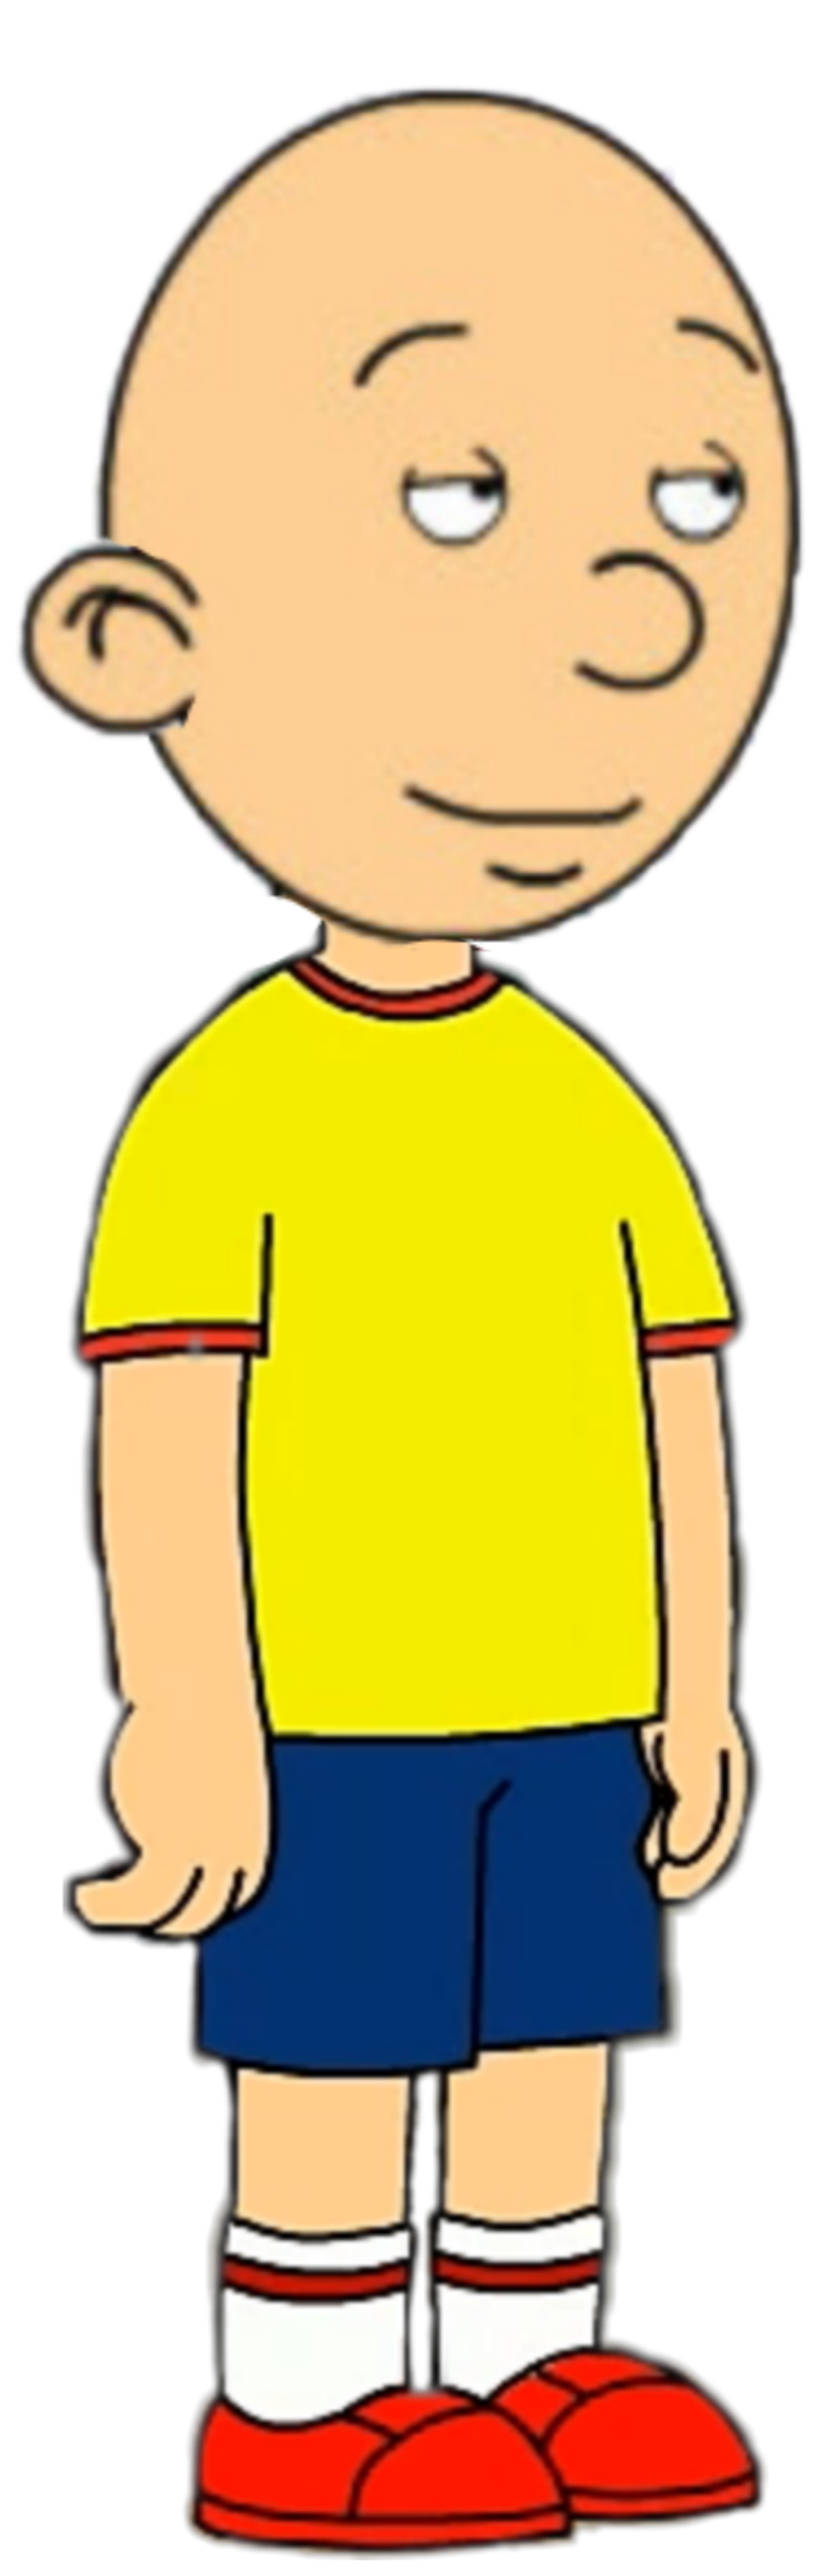 caillou caillouanderson sticker by @thesonicfan2009